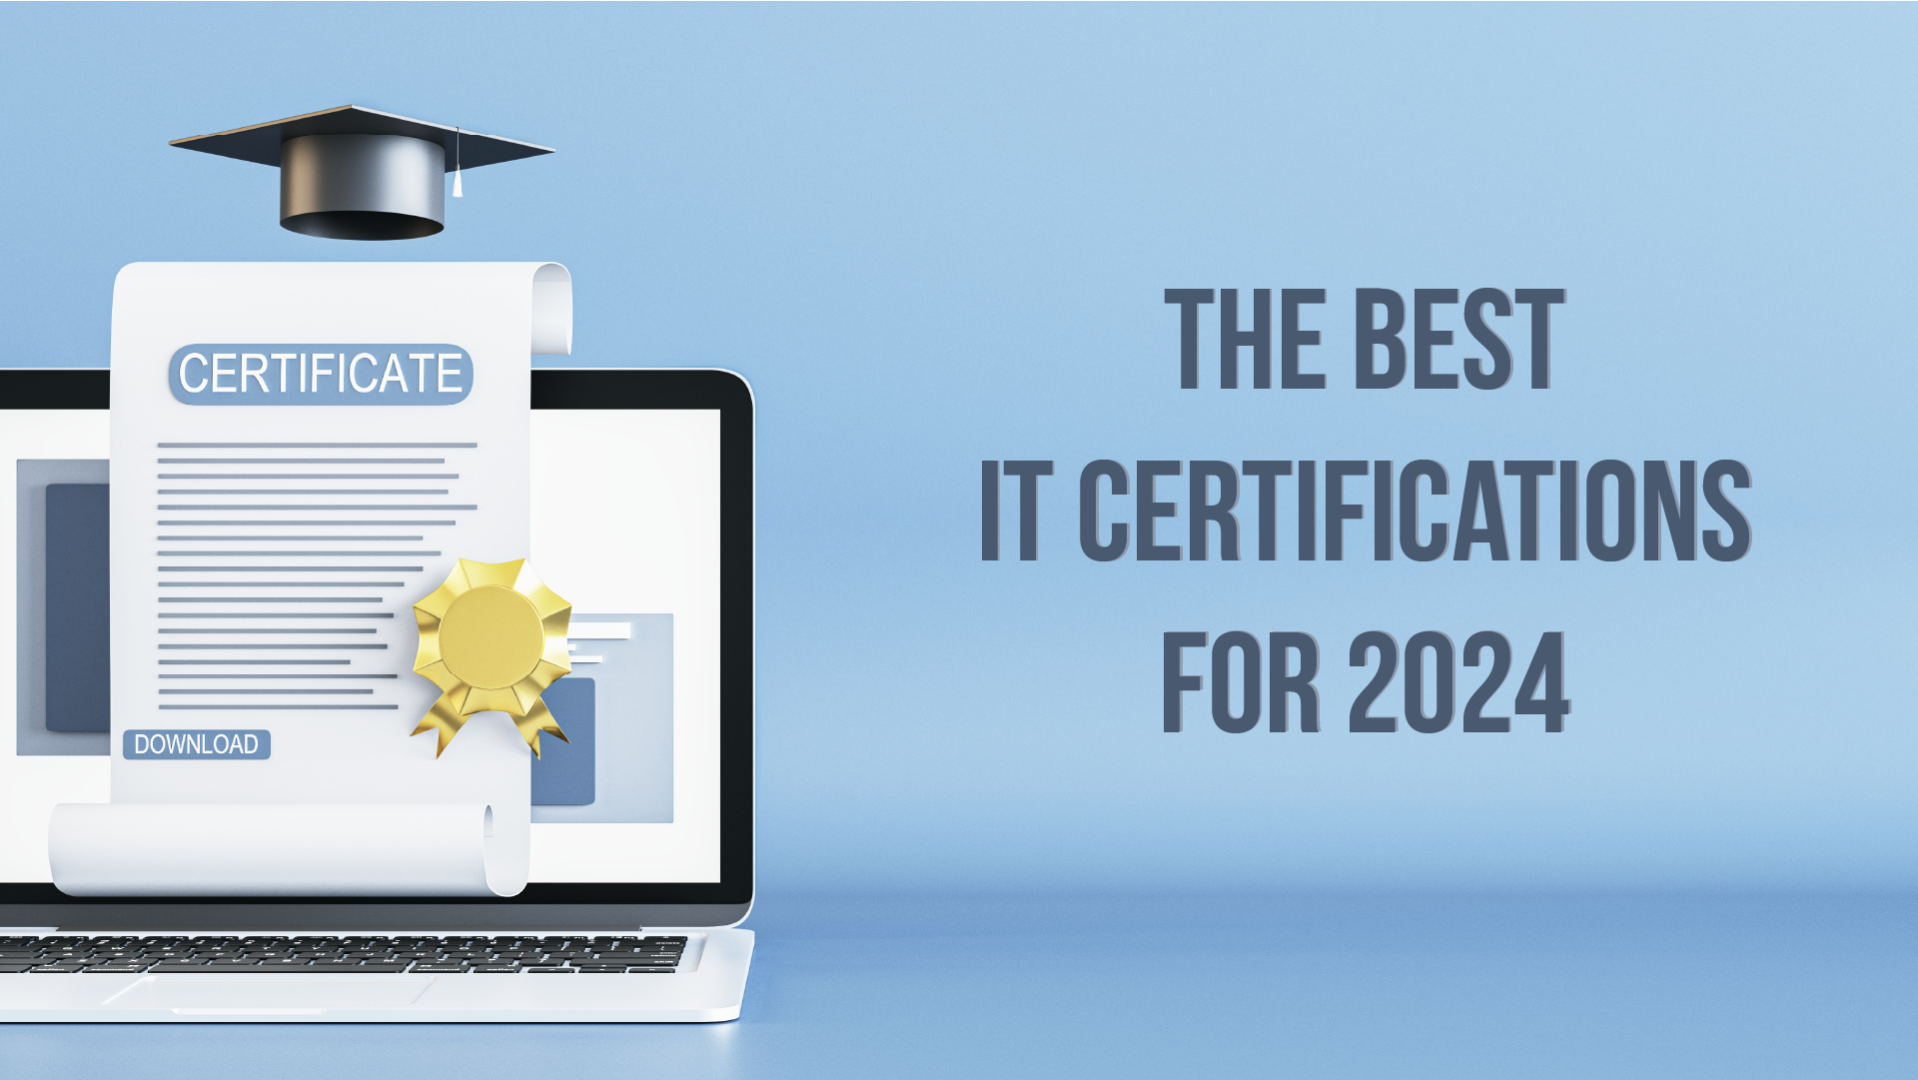 The Best IT Certifications for 2024